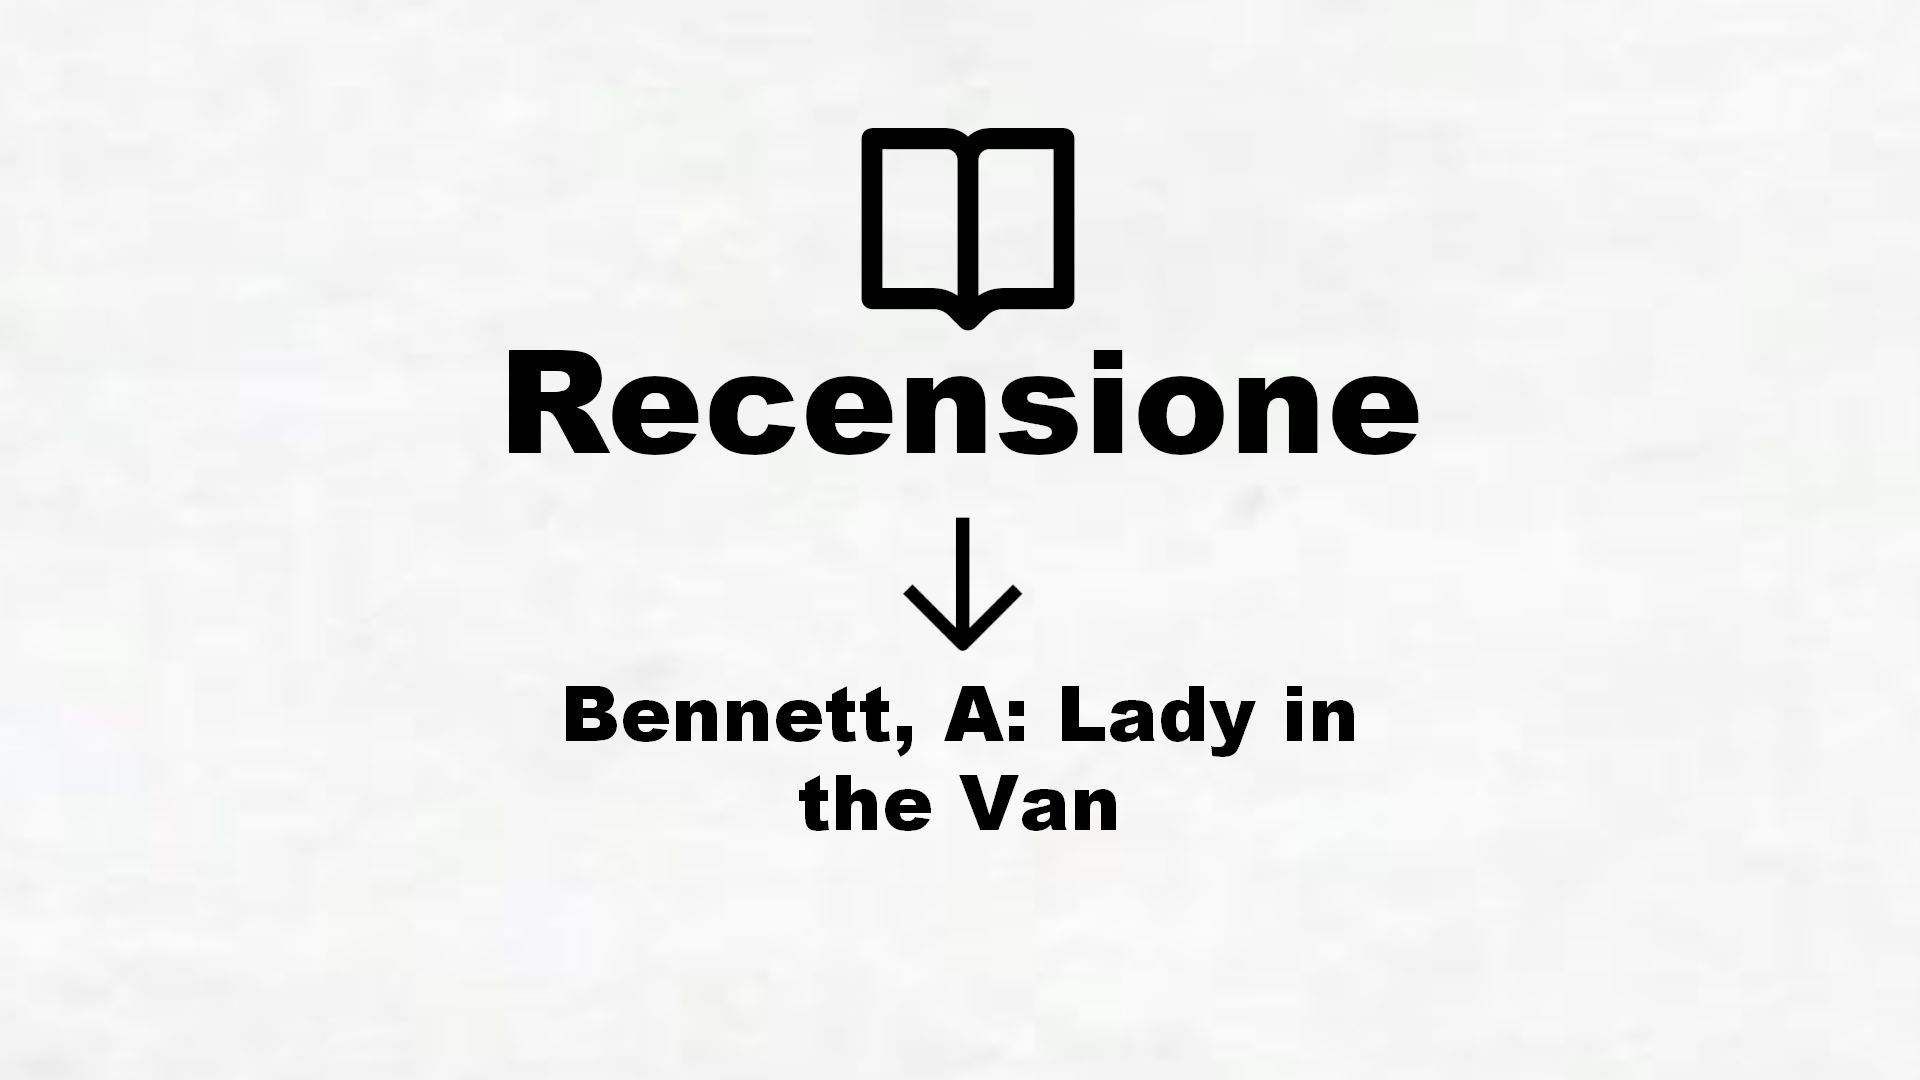 Bennett, A: Lady in the Van – Recensione Libro